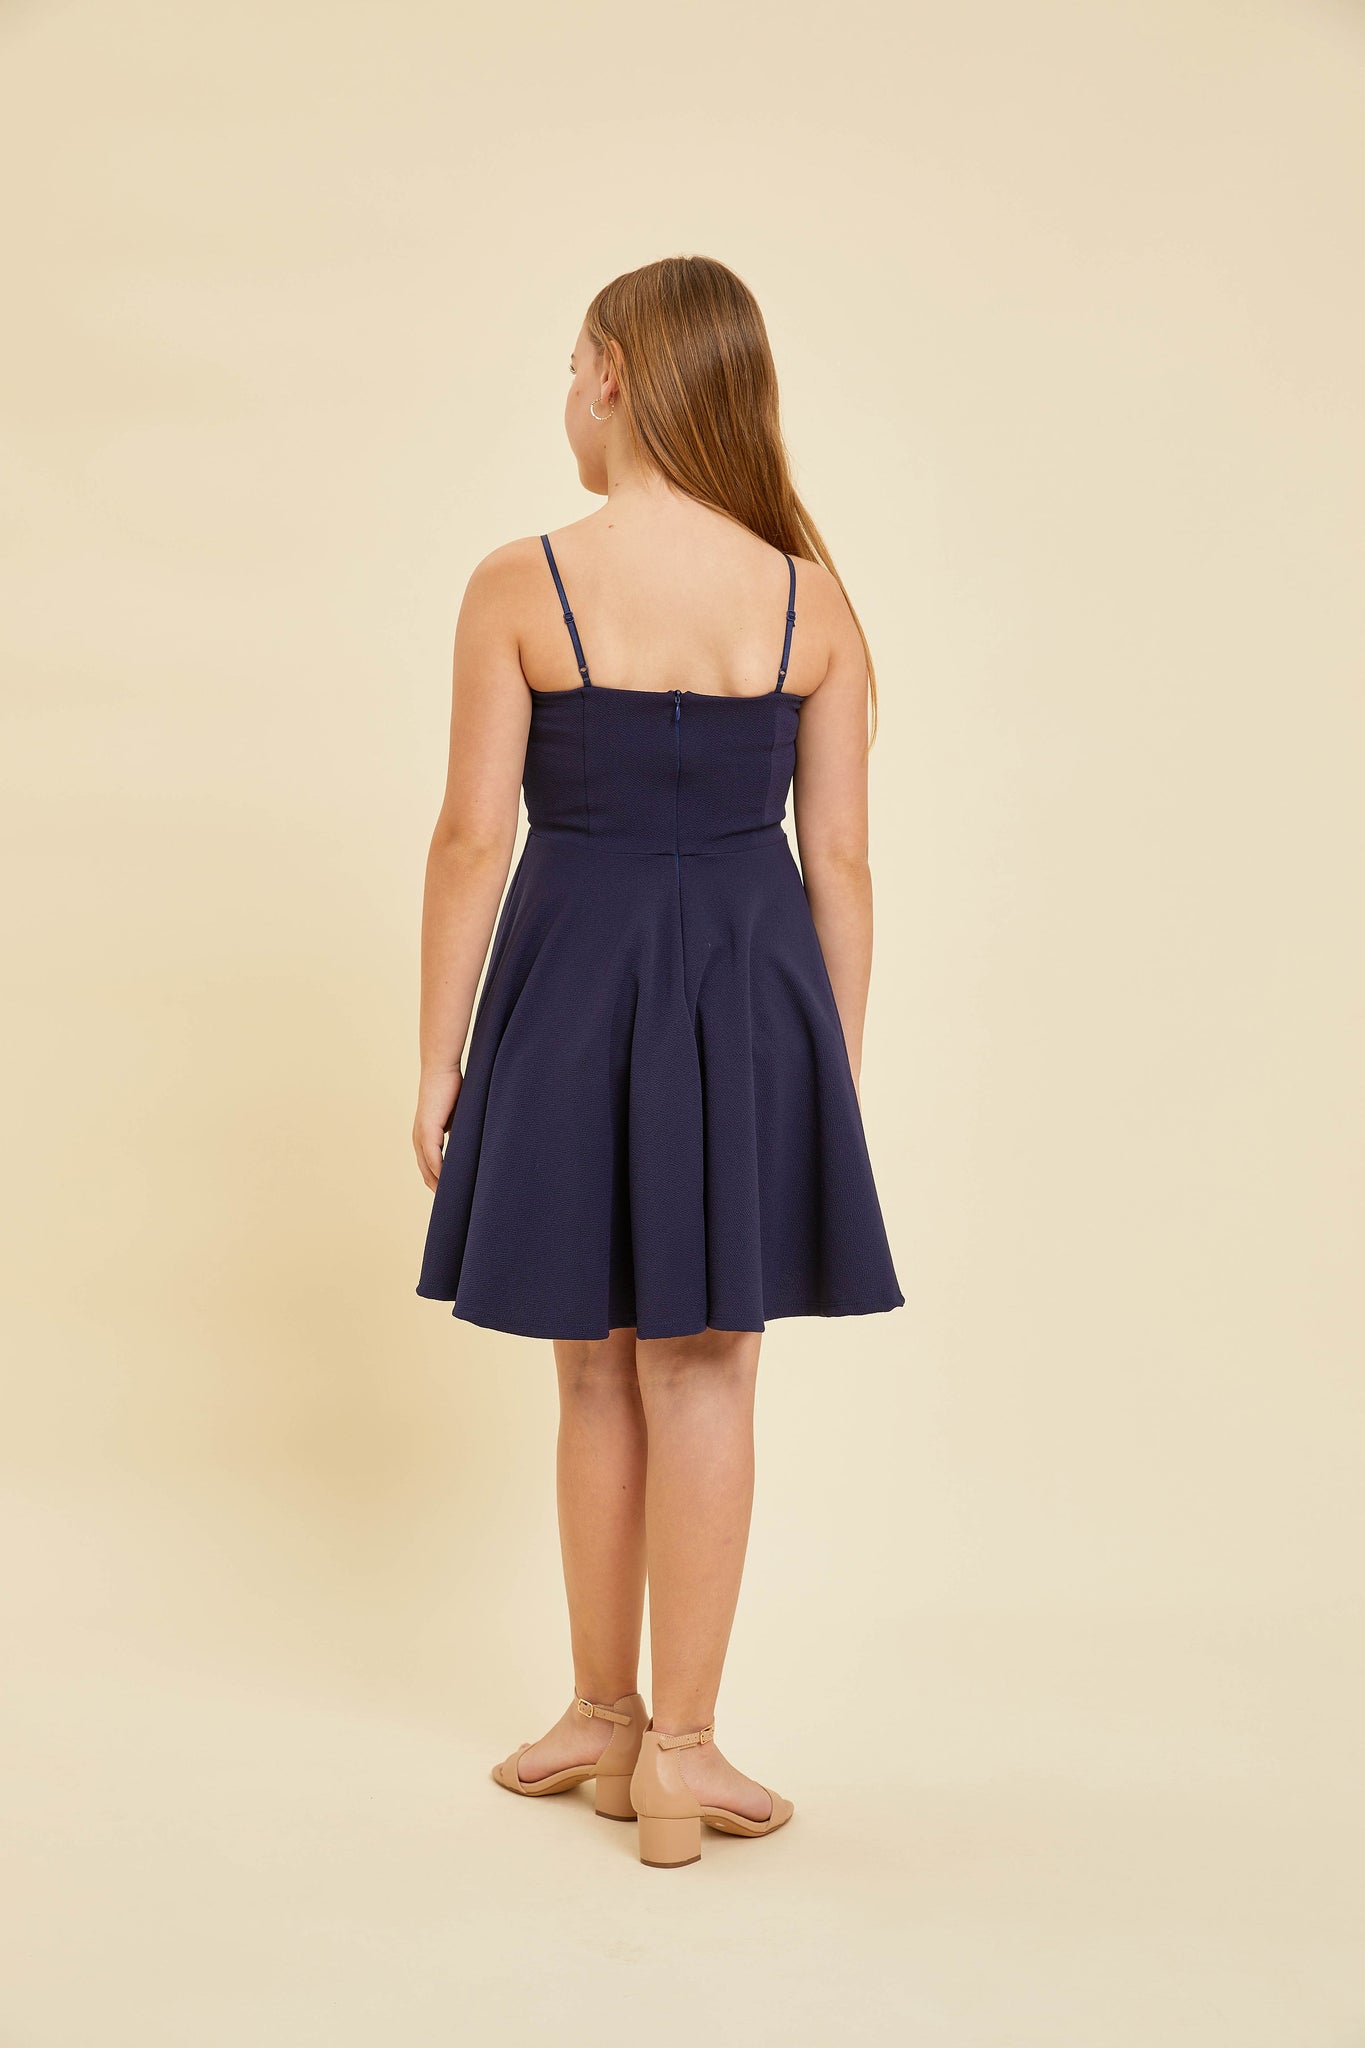 Blonde girl in a navy textured fit and flare dress with belt.